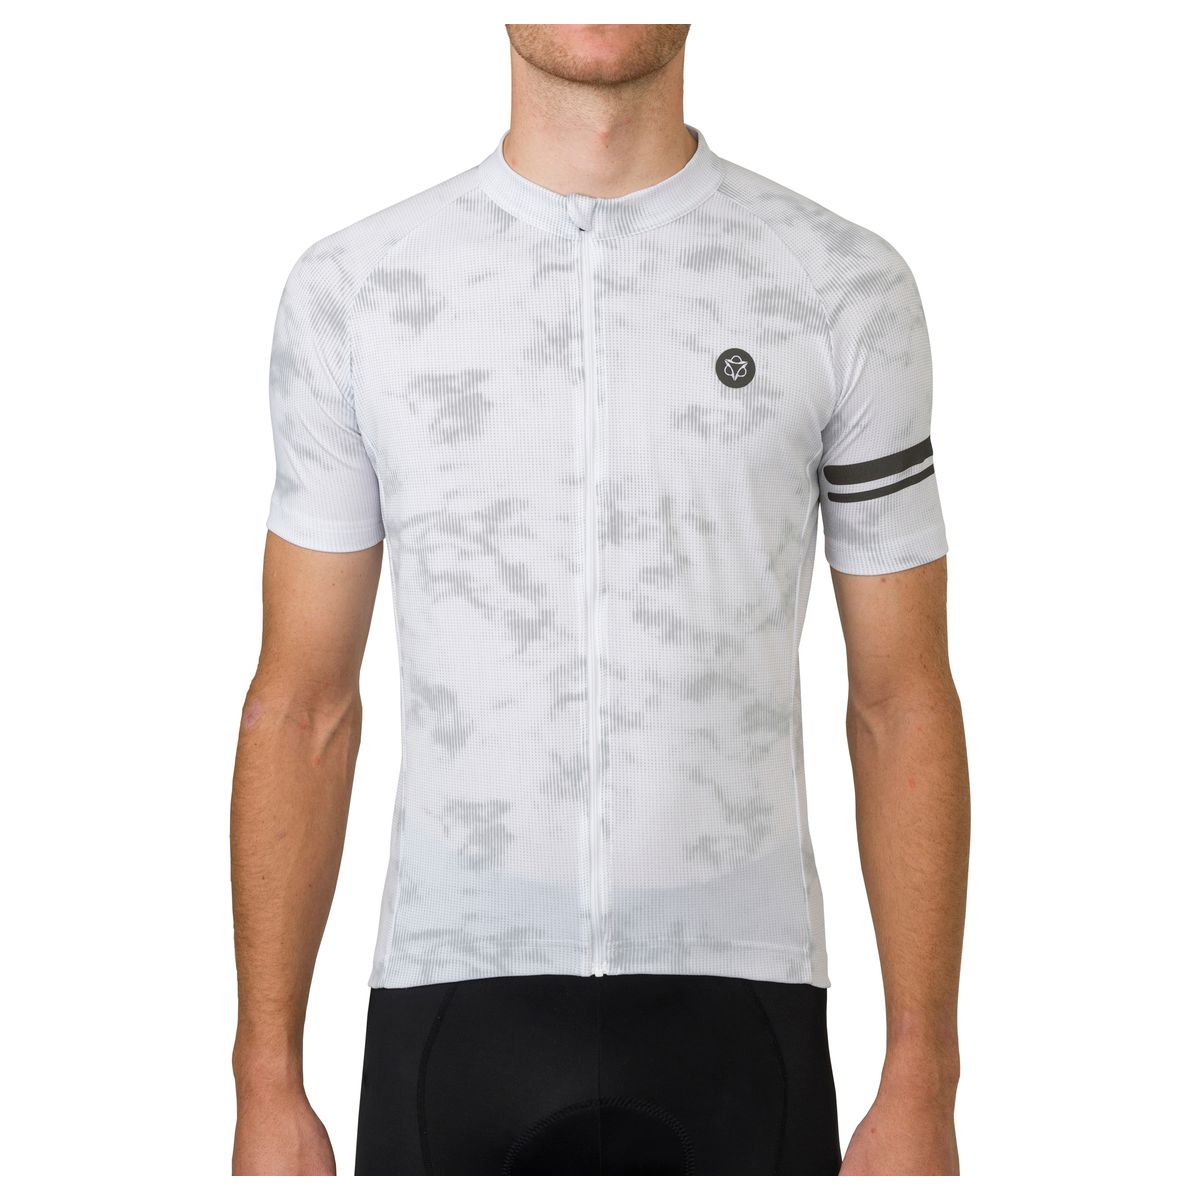 Reflective Maillot Essential Hombres fit example